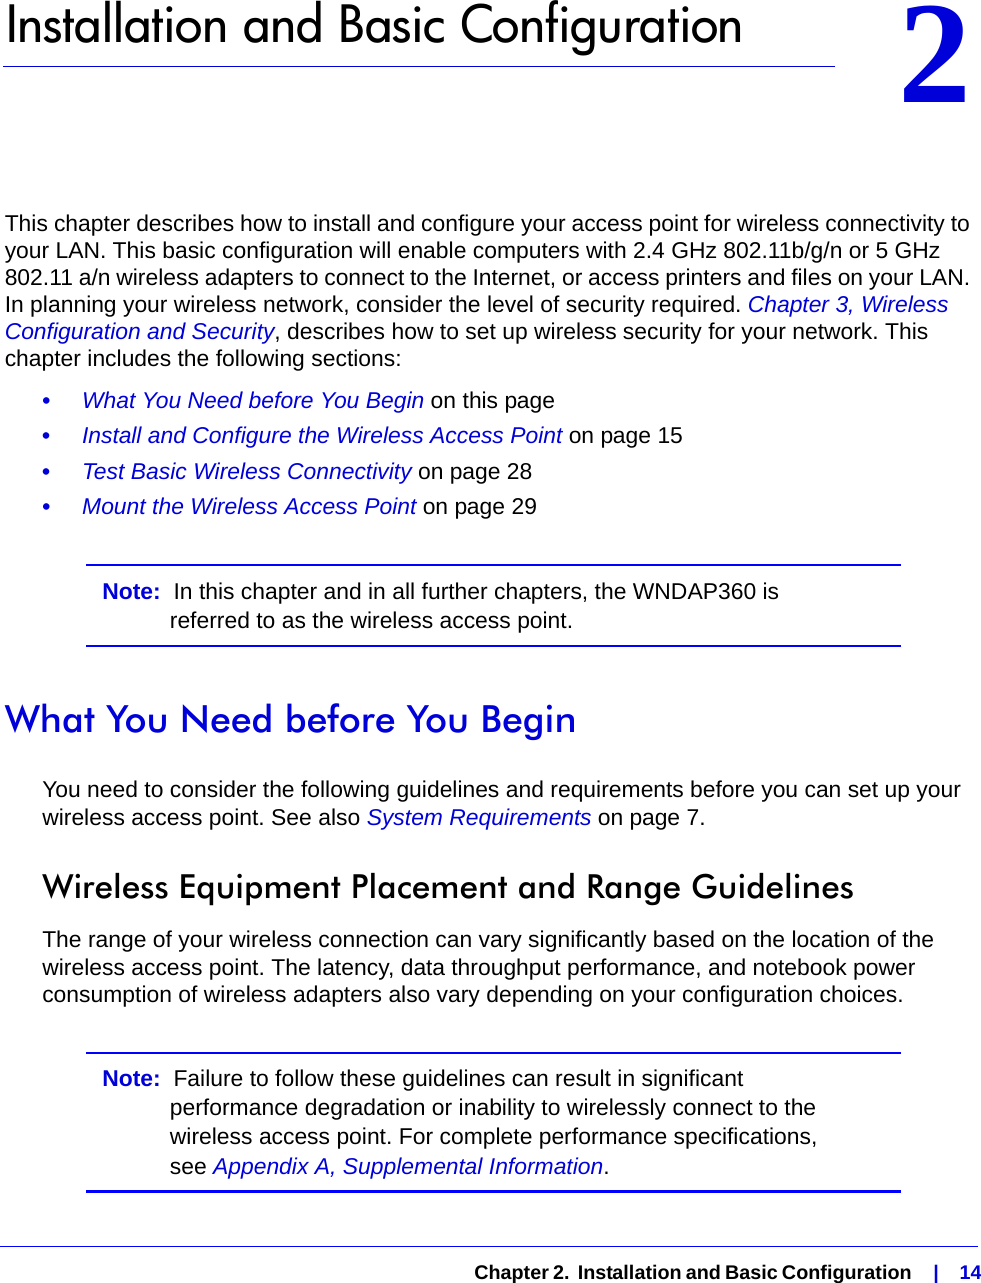   Chapter 2.  Installation and Basic Configuration    |    1422.   Installation and Basic ConfigurationThis chapter describes how to install and configure your access point for wireless connectivity to your LAN. This basic configuration will enable computers with 2.4 GHz 802.11b/g/n or 5 GHz 802.11 a/n wireless adapters to connect to the Internet, or access printers and files on your LAN. In planning your wireless network, consider the level of security required. Chapter 3, Wireless Configuration and Security, describes how to set up wireless security for your network. This chapter includes the following sections:•     What You Need before You Begin on this page•     Install and Configure the Wireless Access Point on page 15•     Test Basic Wireless Connectivity on page 28•     Mount the Wireless Access Point on page 29Note:  In this chapter and in all further chapters, the WNDAP360 is referred to as the wireless access point.What You Need before You BeginYou need to consider the following guidelines and requirements before you can set up your wireless access point. See also System Requirements on page 7.Wireless Equipment Placement and Range GuidelinesThe range of your wireless connection can vary significantly based on the location of the wireless access point. The latency, data throughput performance, and notebook power consumption of wireless adapters also vary depending on your configuration choices.Note:  Failure to follow these guidelines can result in significant performance degradation or inability to wirelessly connect to the wireless access point. For complete performance specifications, see Appendix A, Supplemental Information.